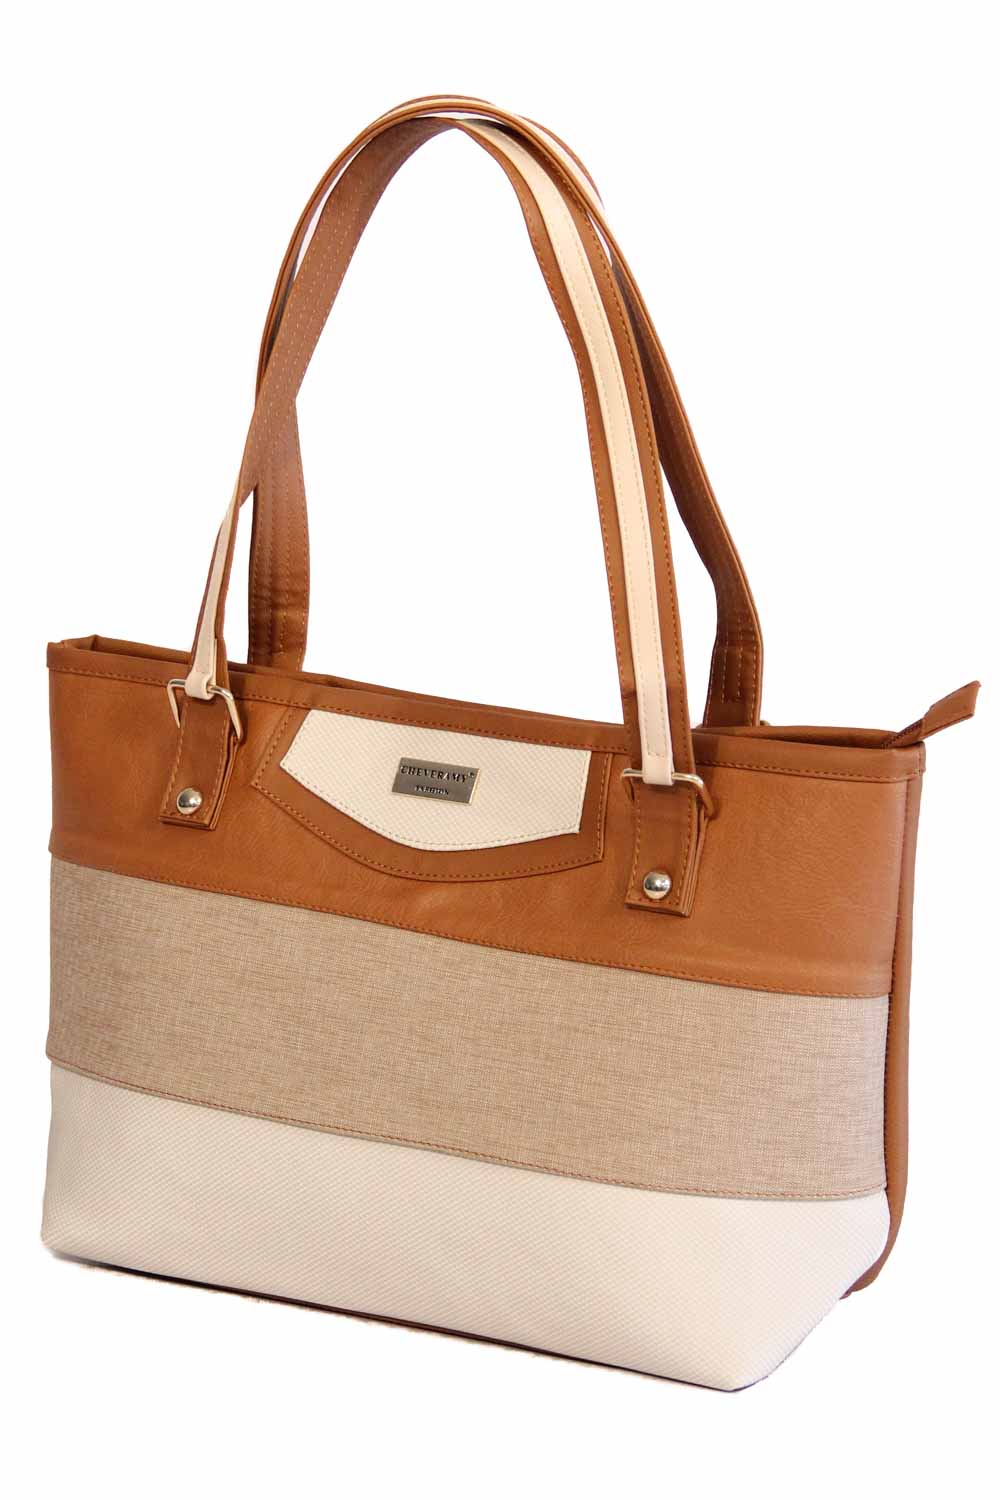 BOLSO MUJER TRES LINEAS